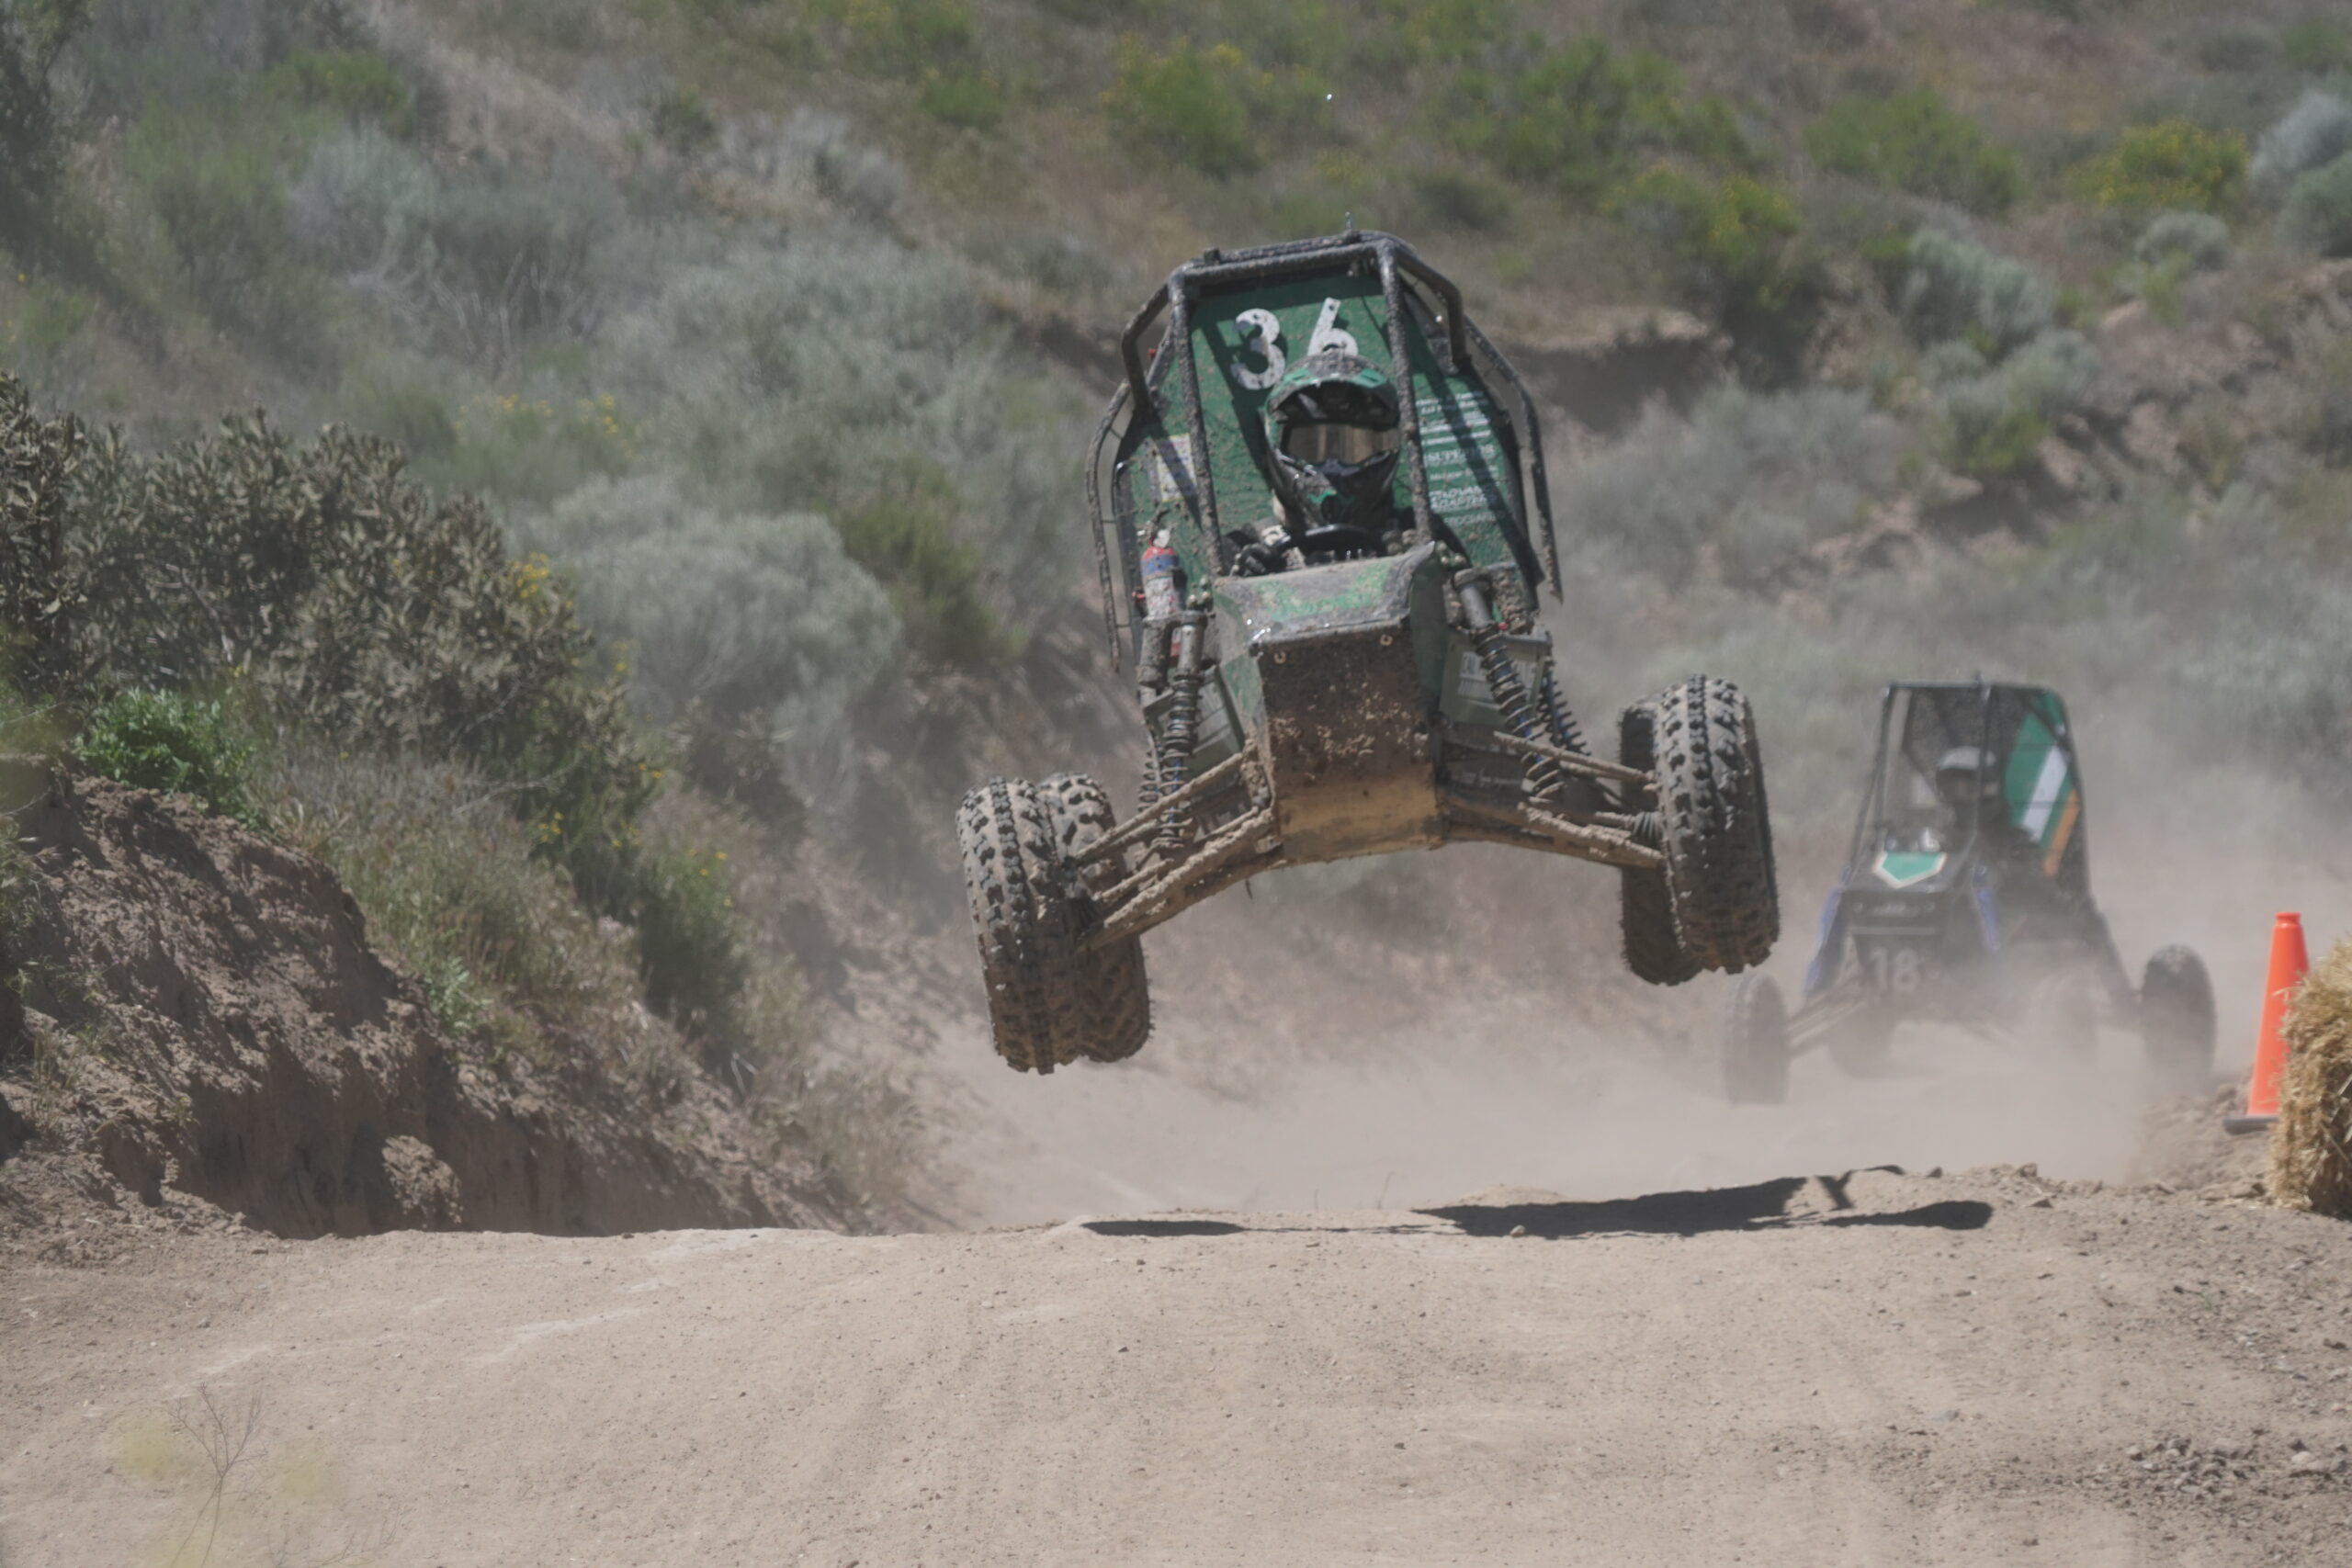 Baja SAE vehicle clears an obstacle on the off-road course